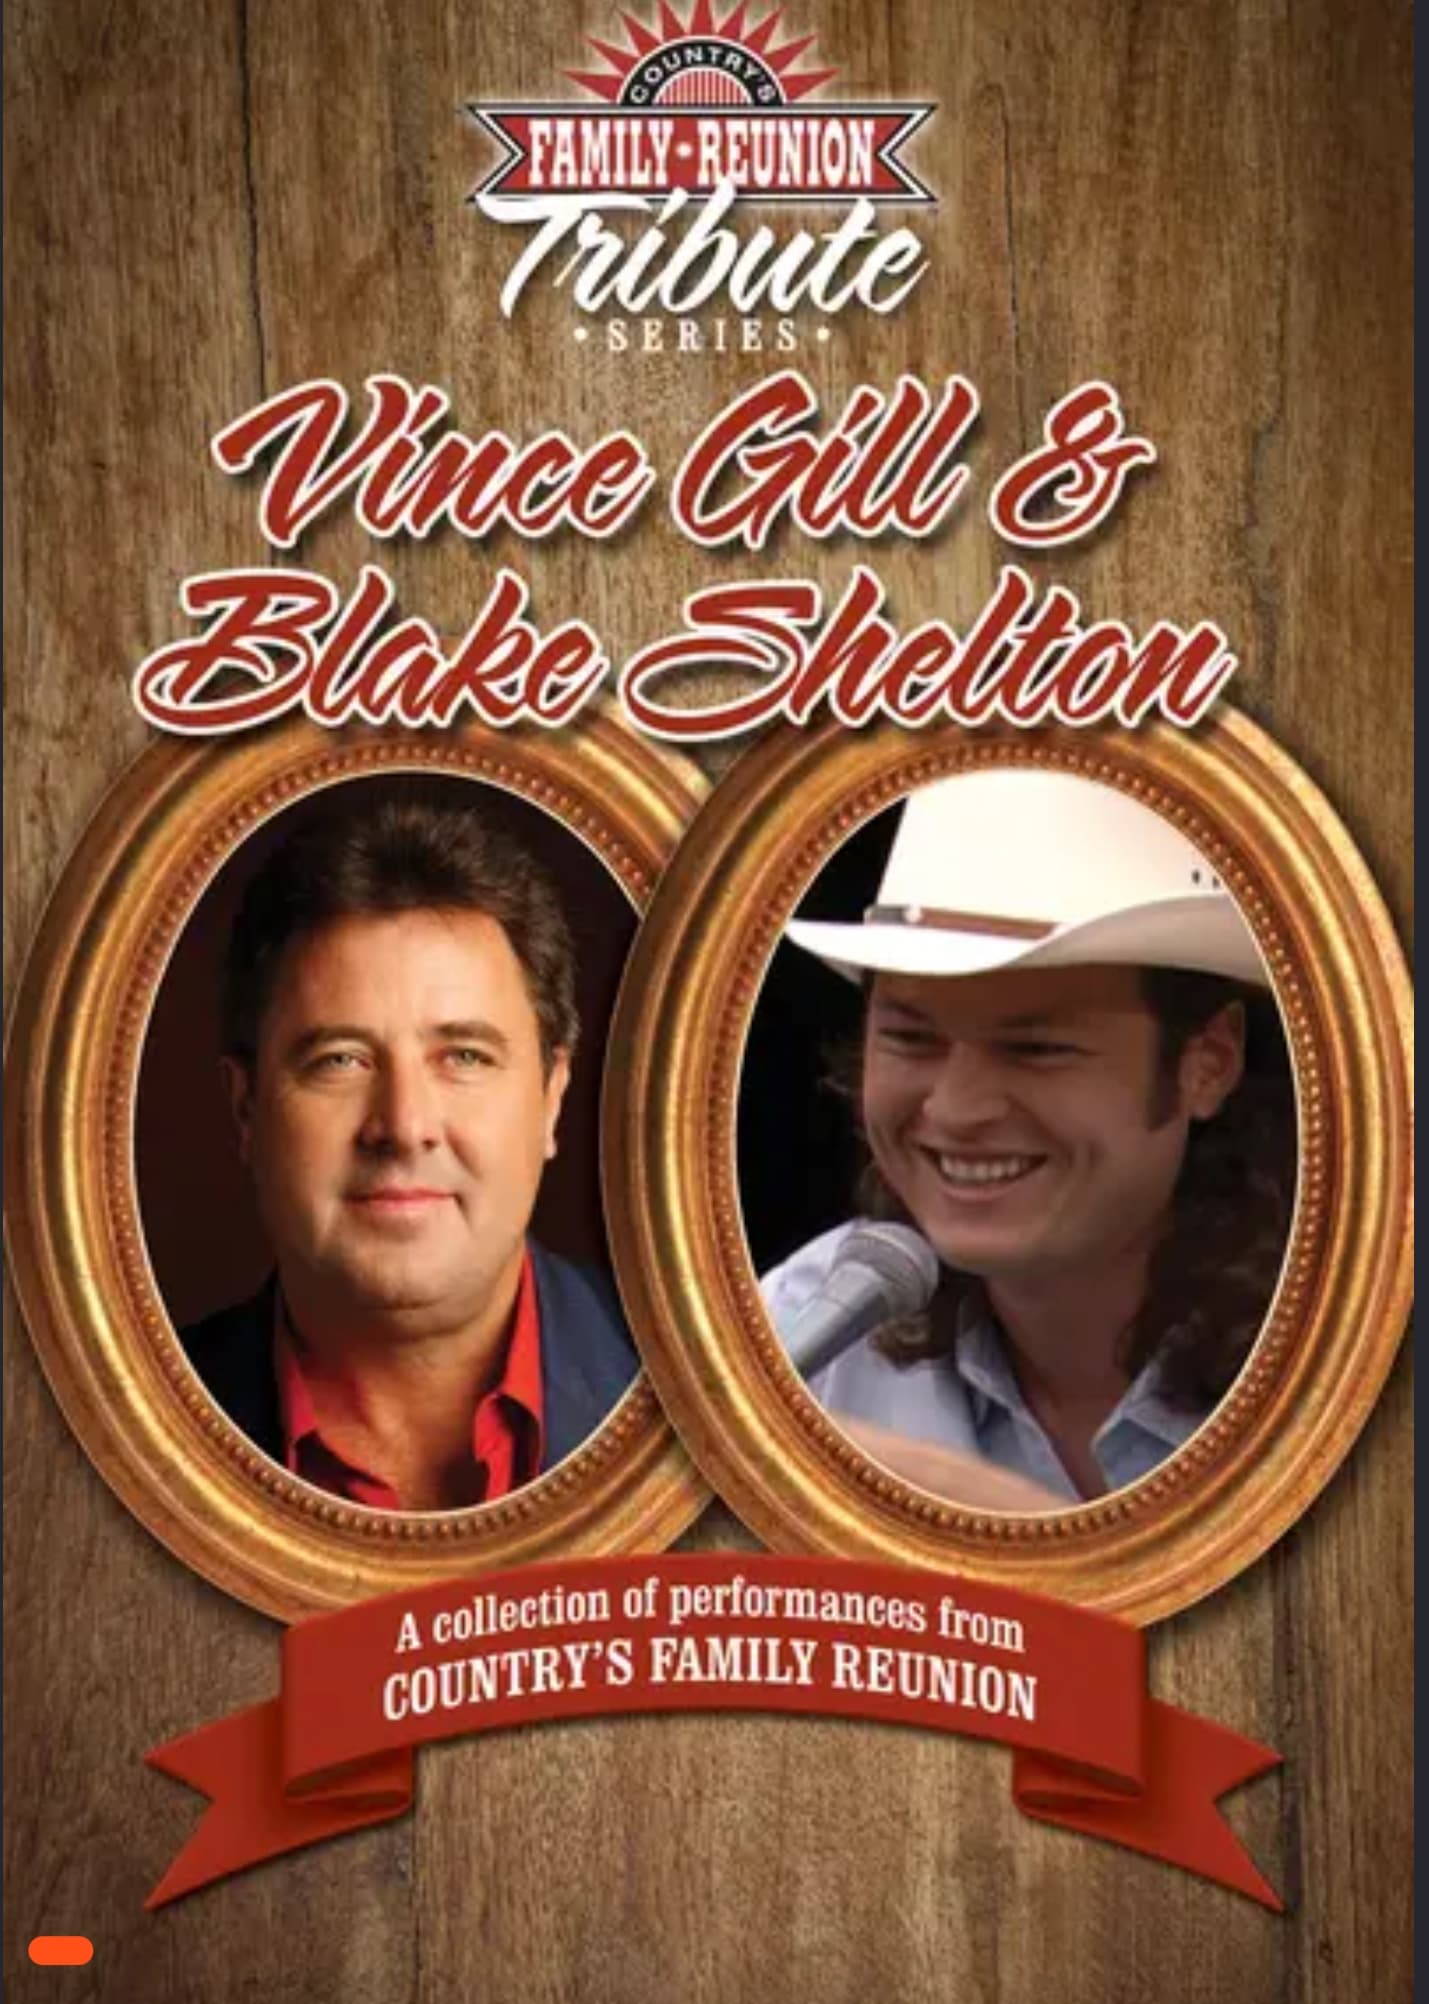 Country's Family Reunion Tribute Series: Vince Gill & Blake Shelton